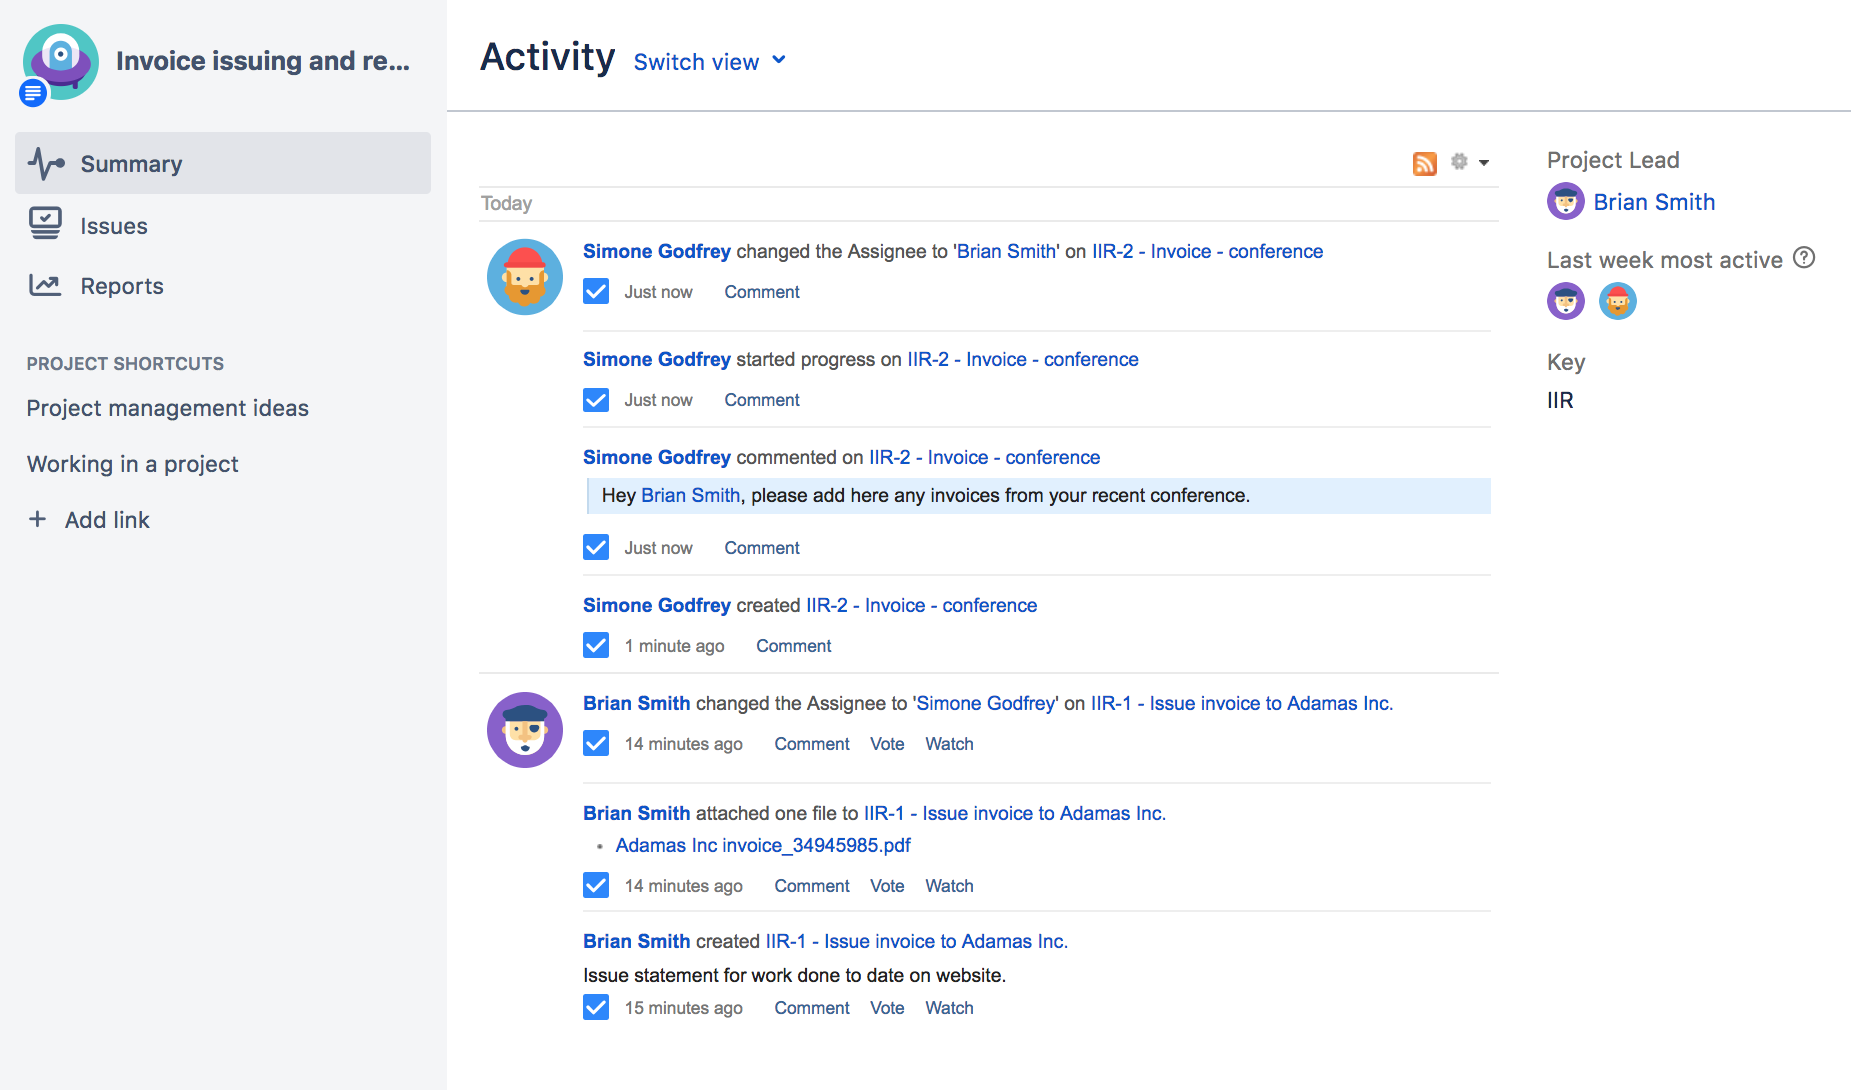 Activity stream in a project